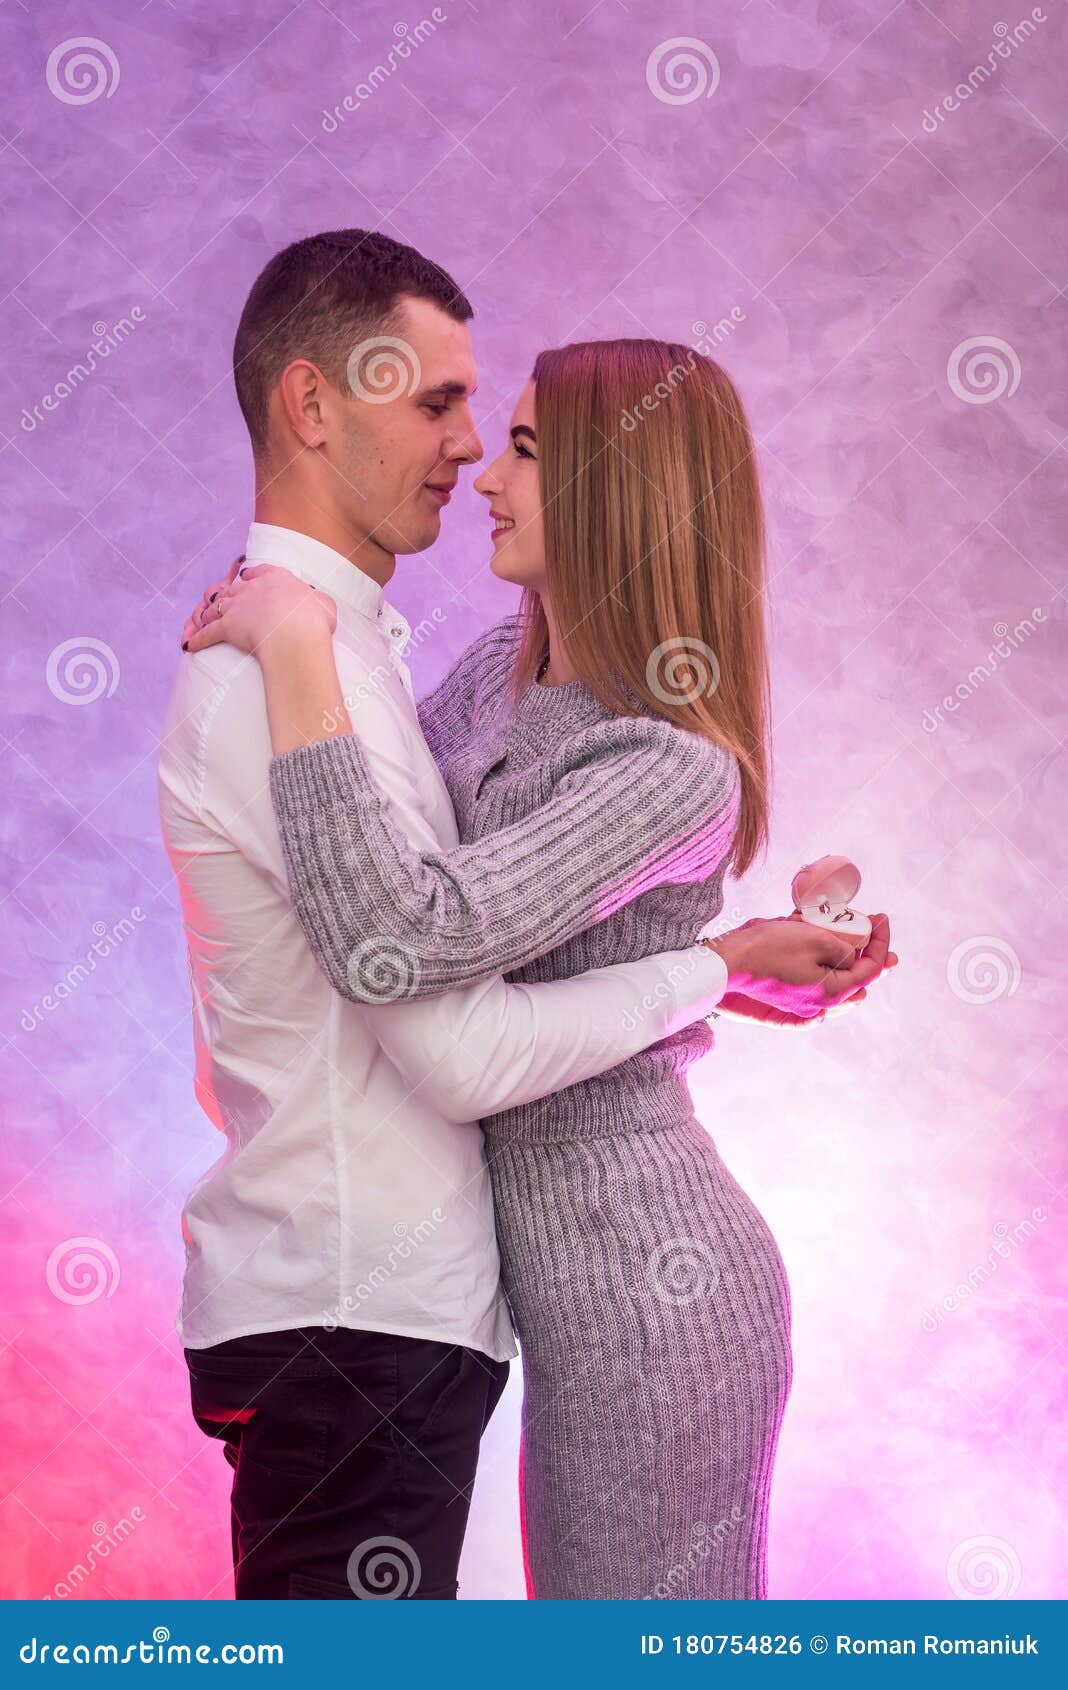 Young Man Making Proposal with Gold Ring with Diamond To His Girl